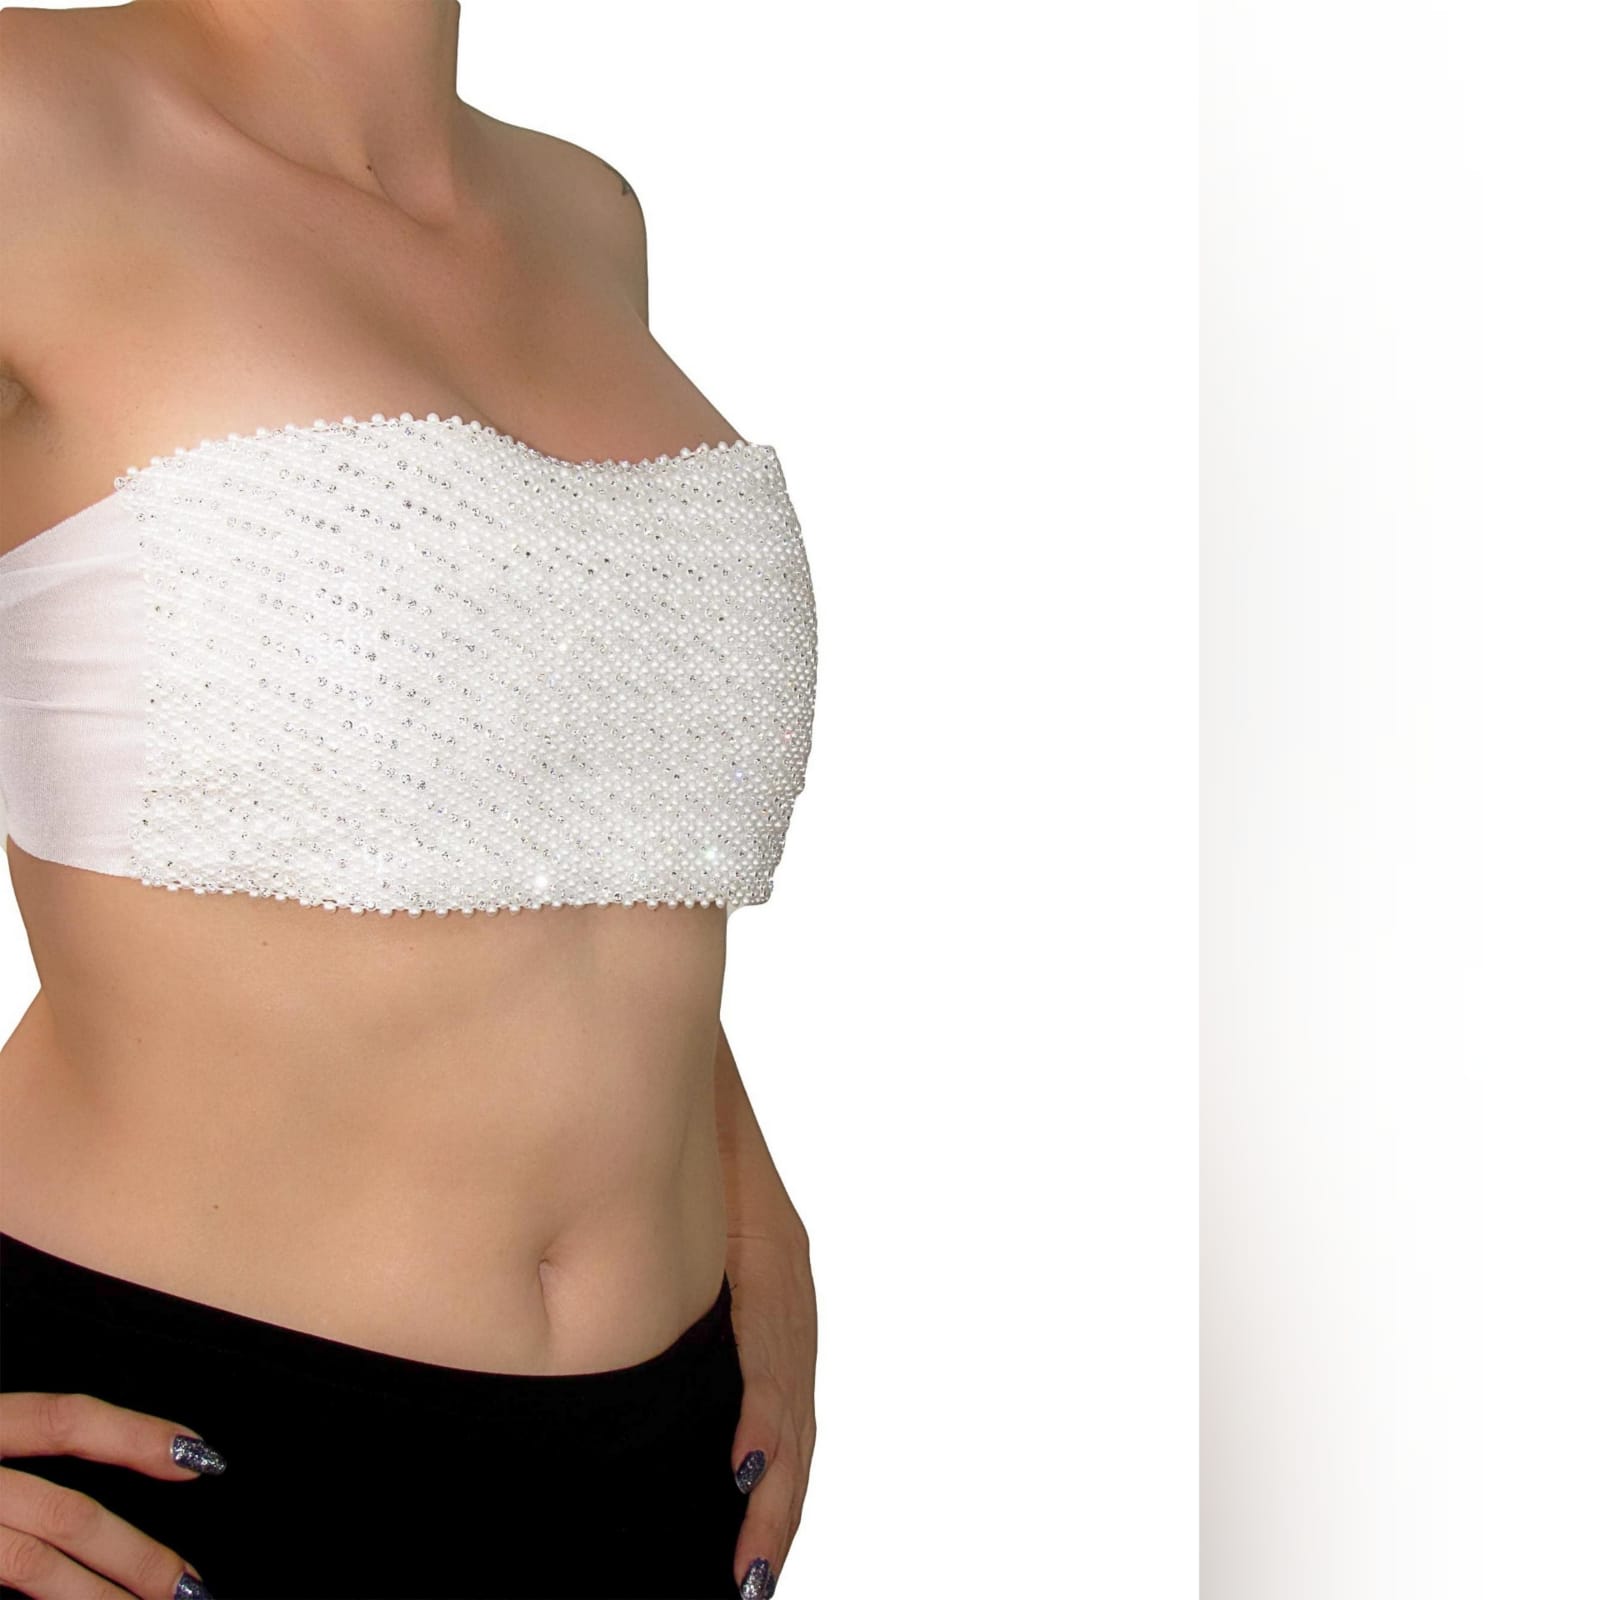 White boobtube tie up strap crop top 4 white boob-tube tie up strap crop top, with a beaded front. Handmade, one of a kind short top, great for the young woman that wants to look unique and feel sexy. This short sexy top fits a small, medium or large as you can just tie it tighter or looser. It is a great smart casual top, for a night out of dancing and fun. Can also be worn more casual on a lovely summer day as your one of a kind summer top.